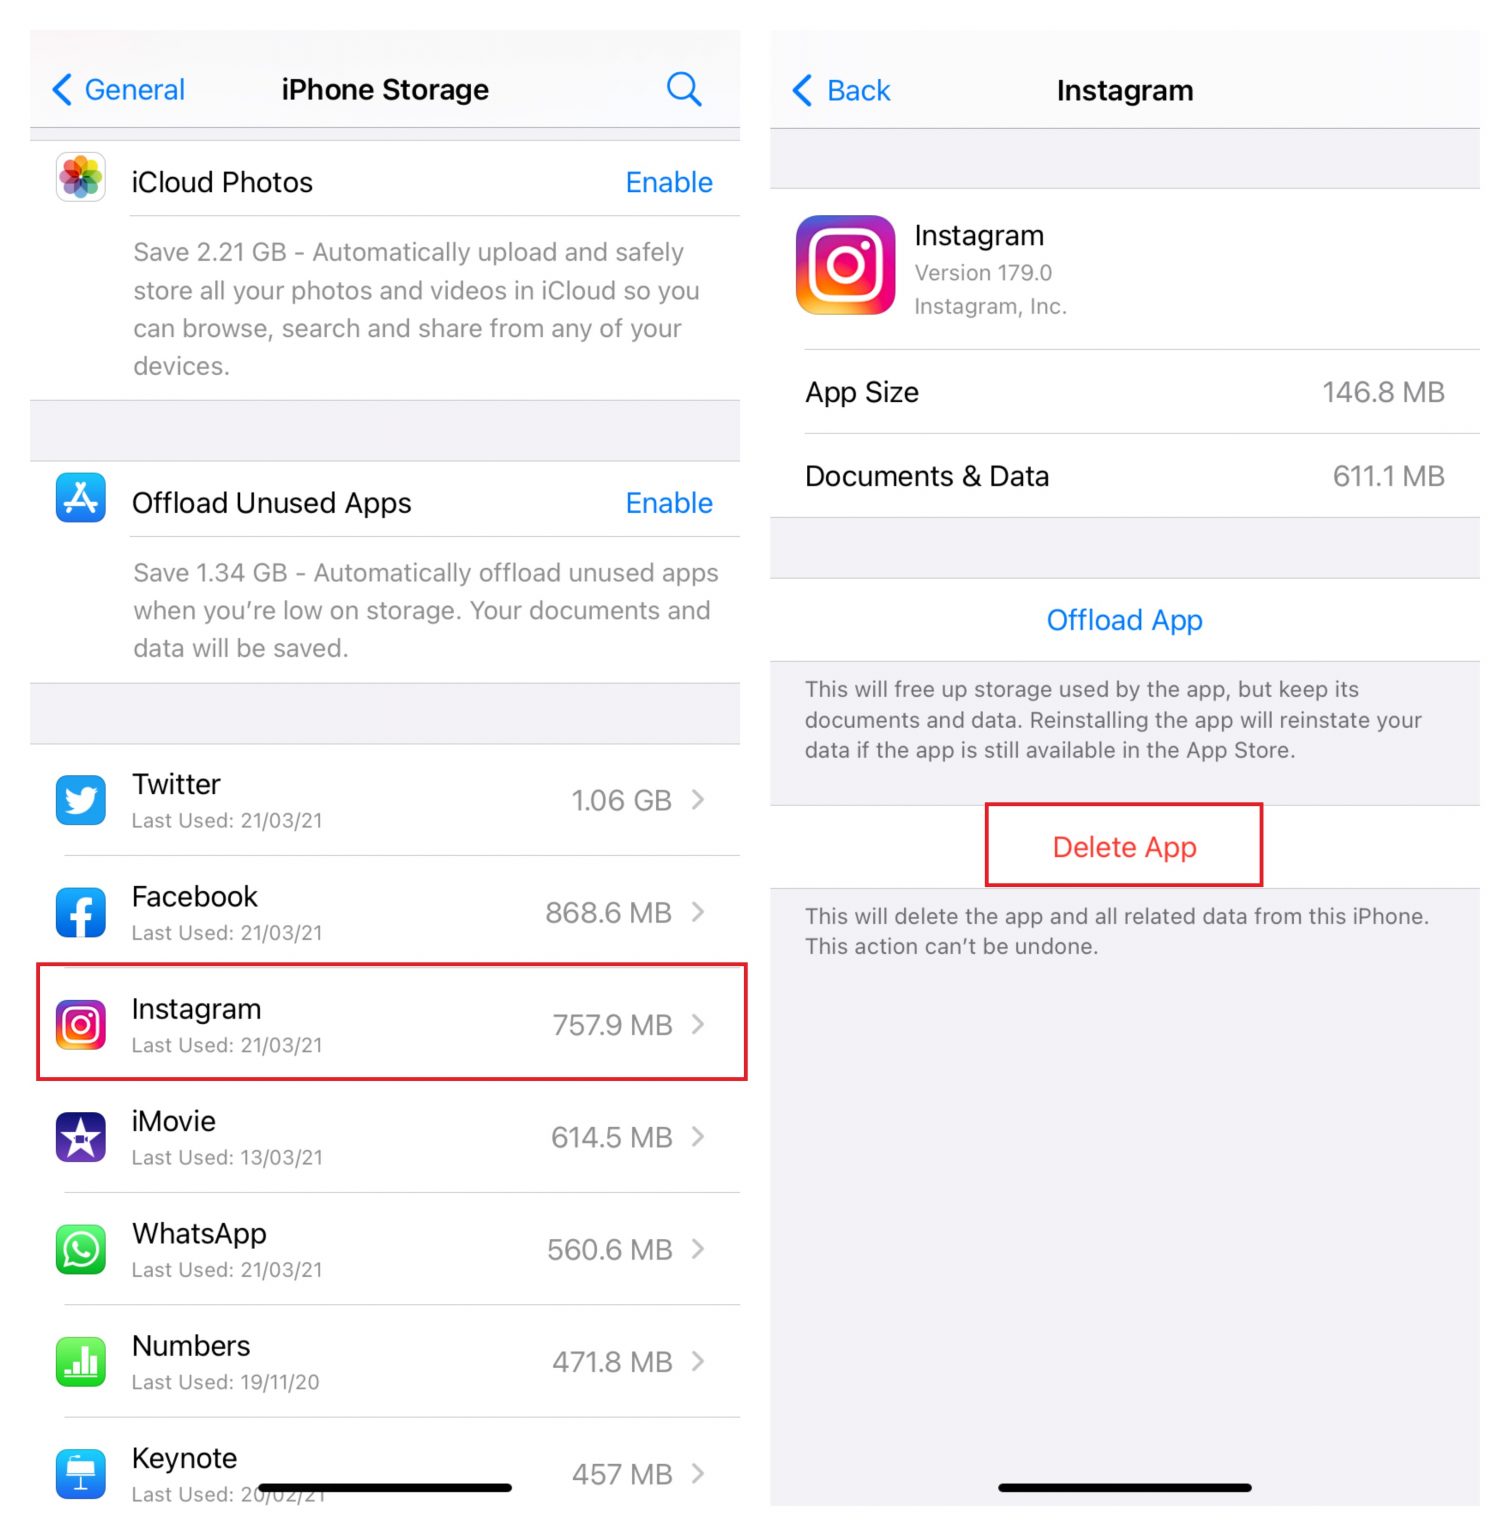 how to download picture from instagram to iphone